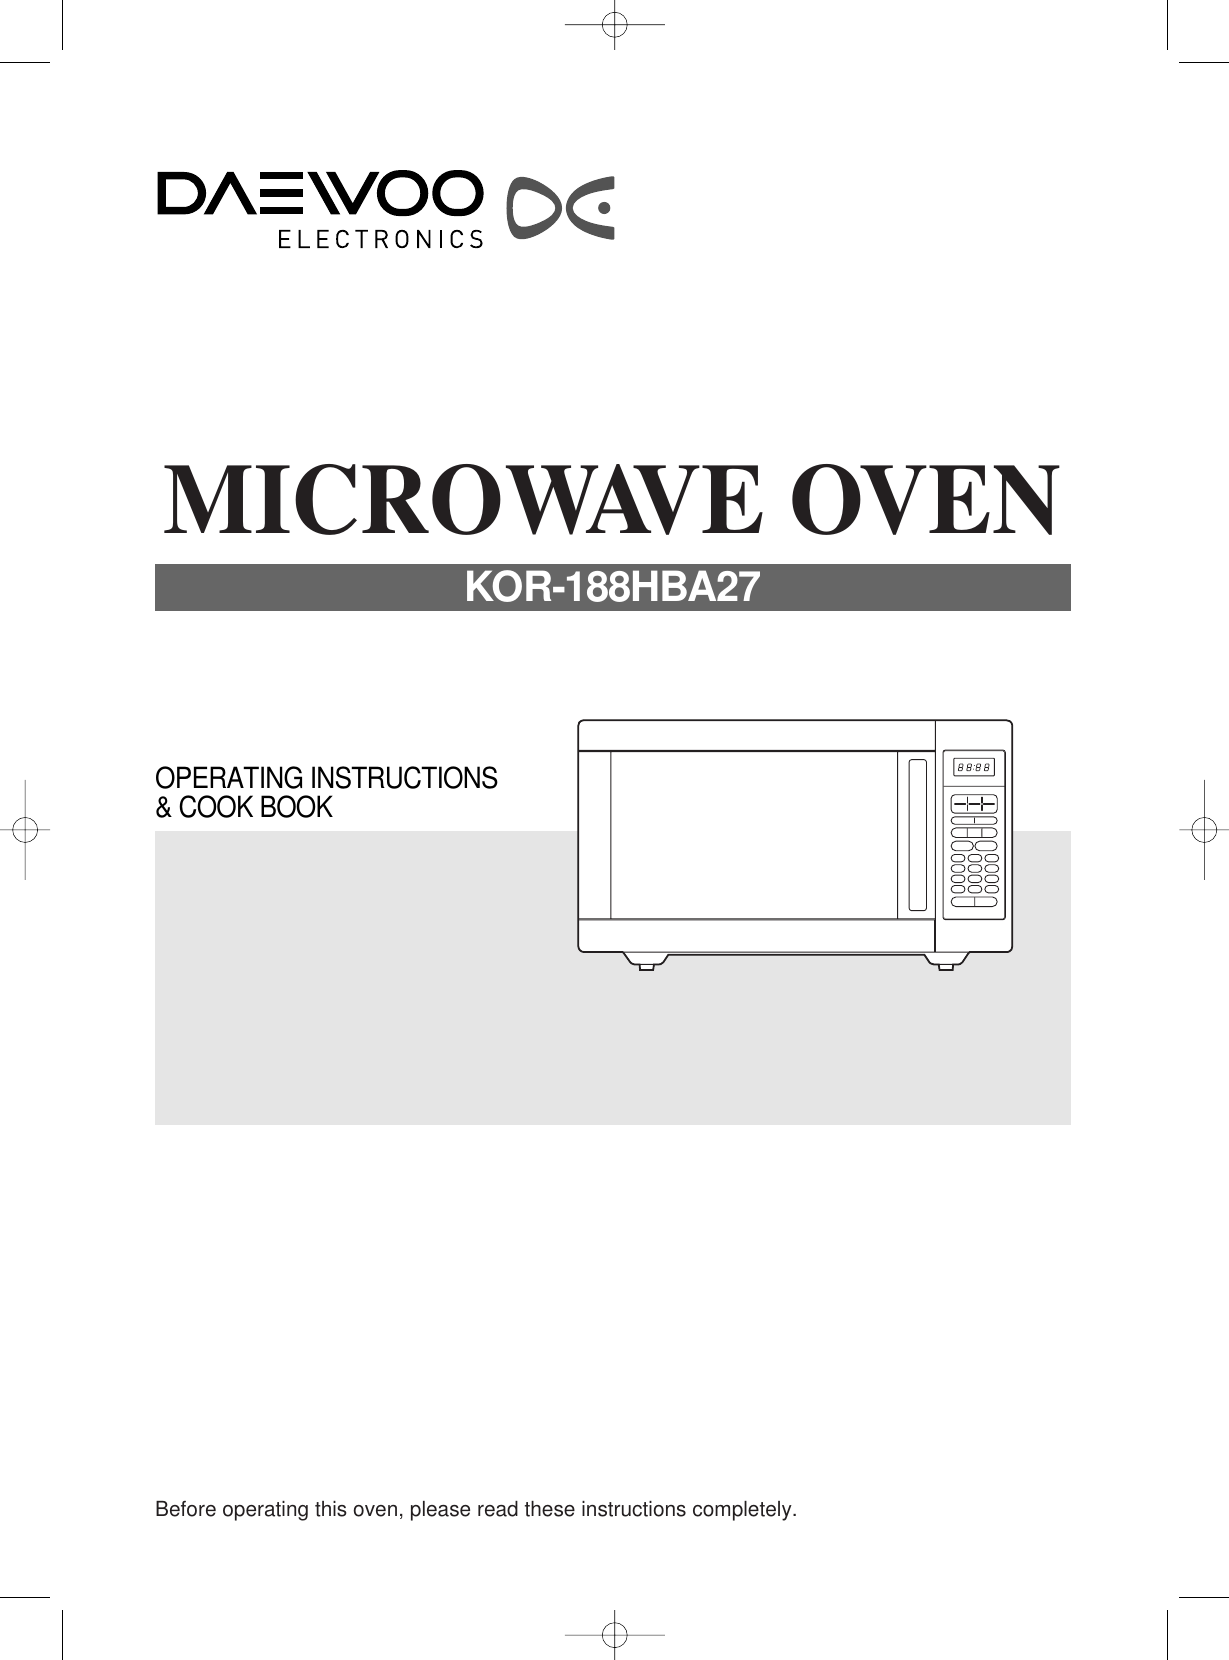 Before operating this oven, please read these instructions completely.OPERATING INSTRUCTIONS&amp; COOK BOOKMICROWAVE OVENKOR-188HBA27